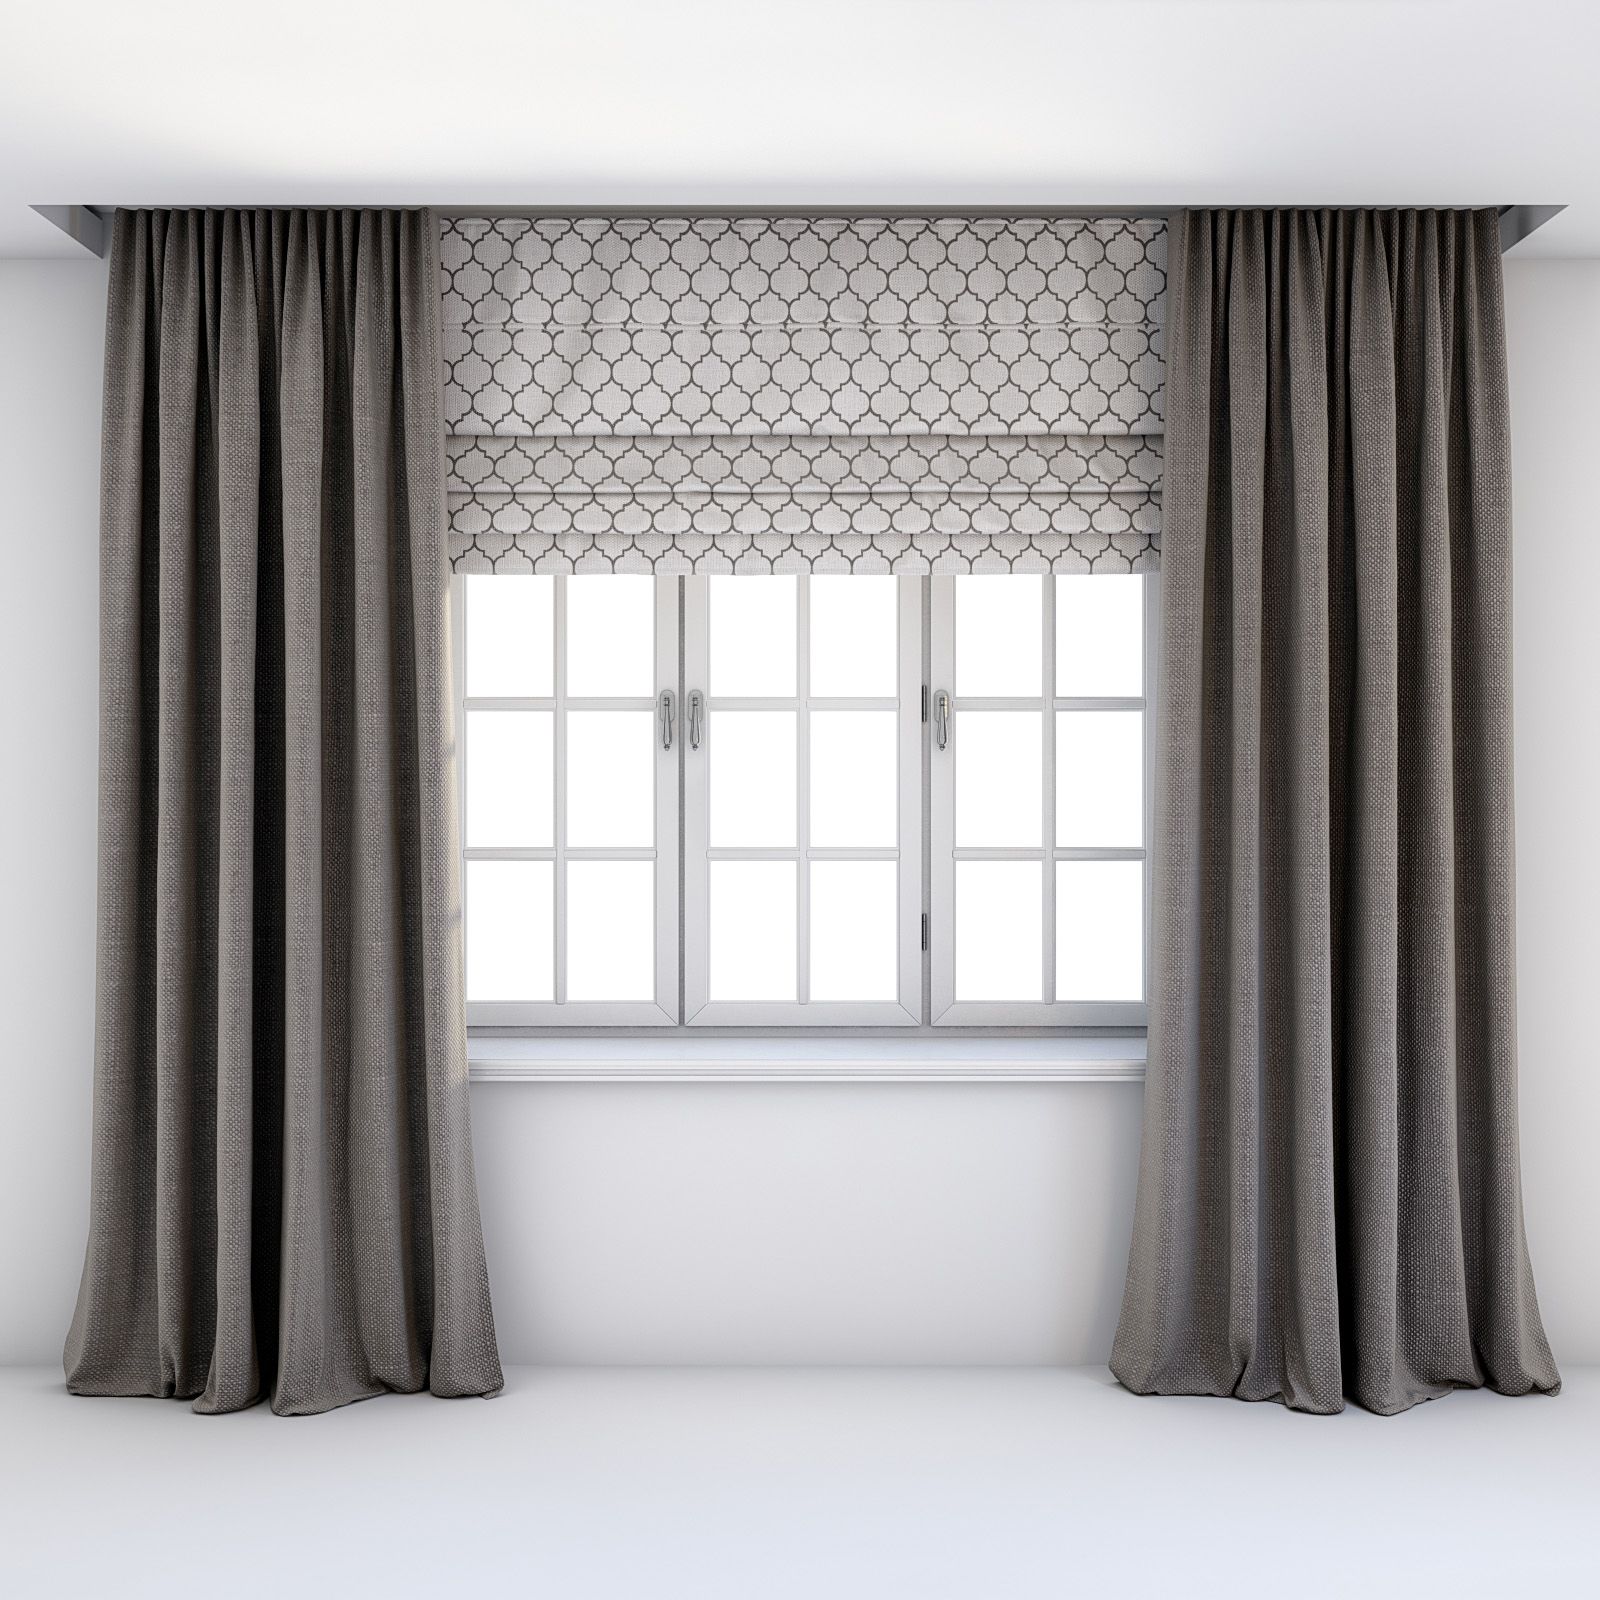 Elevate Your Space with Elegant Roman Curtains